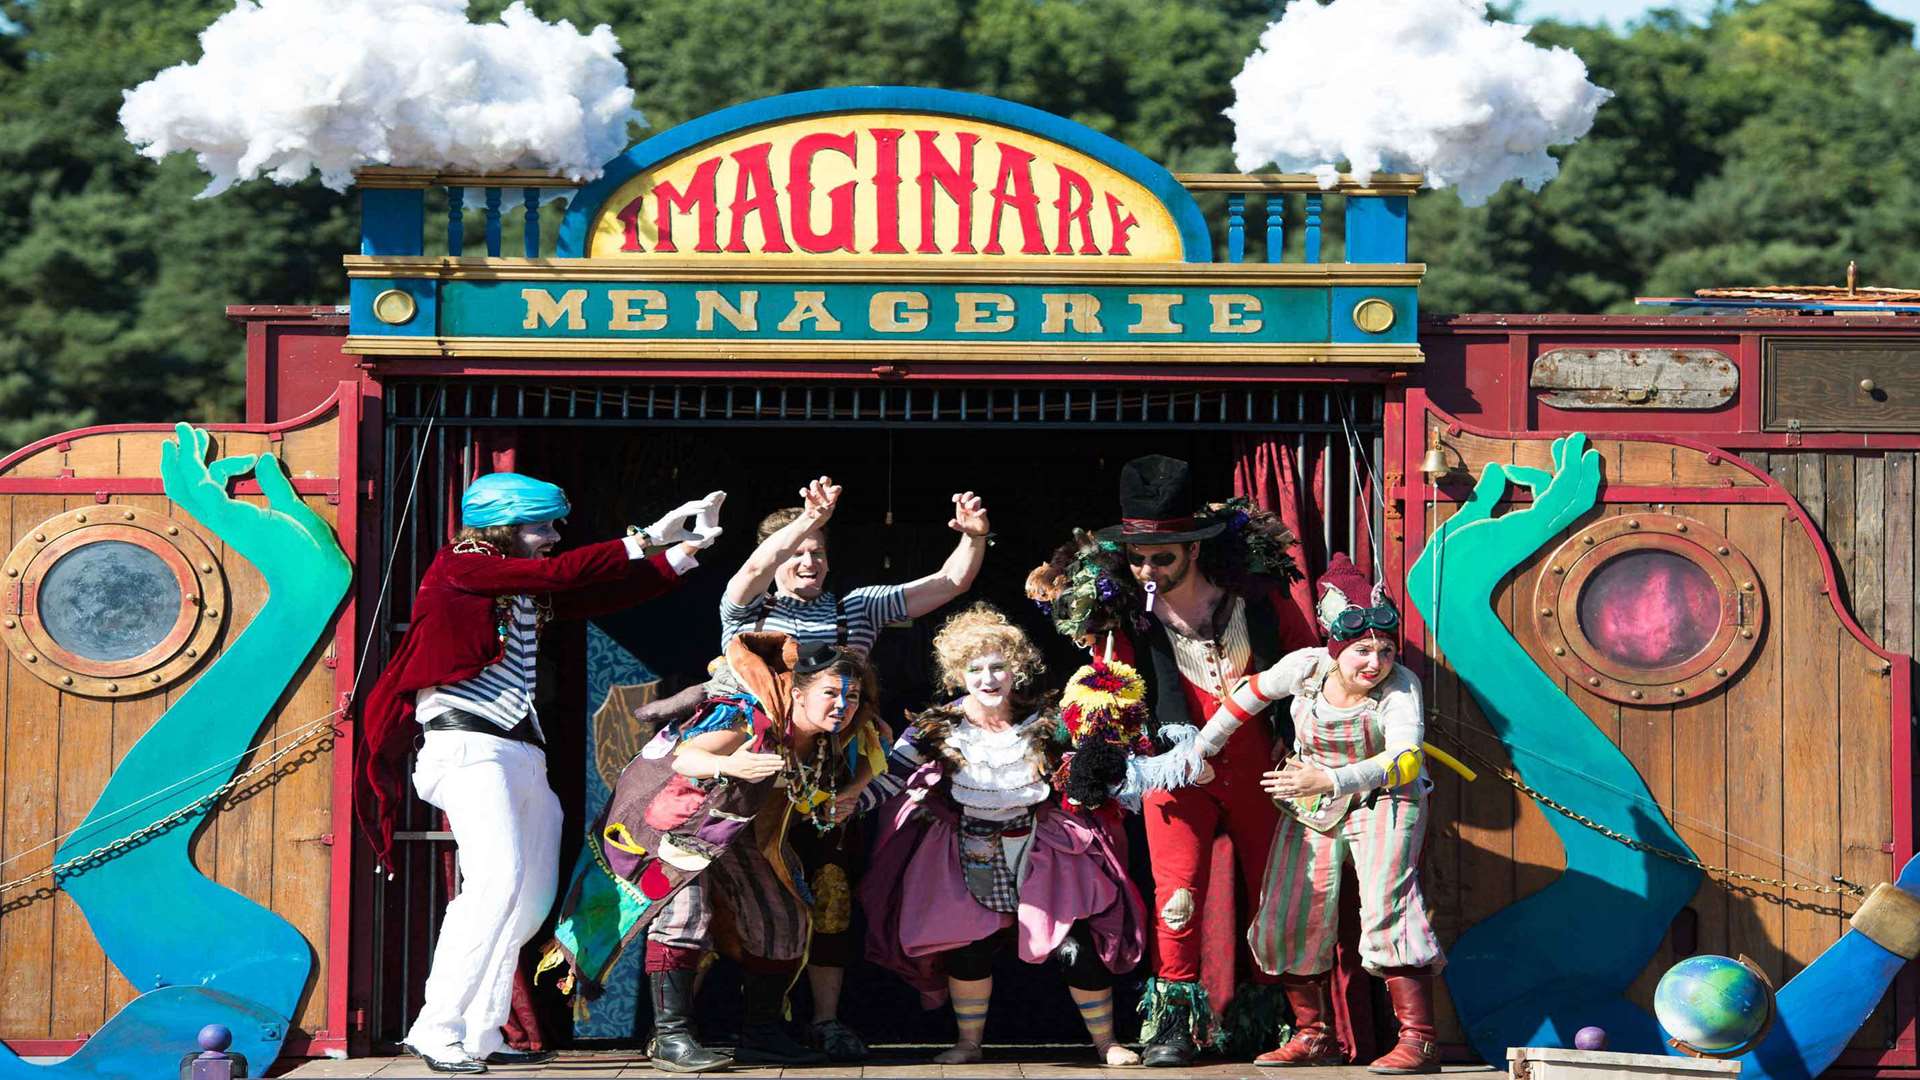 The Imaginary Menagerie show at the Outlands Festival